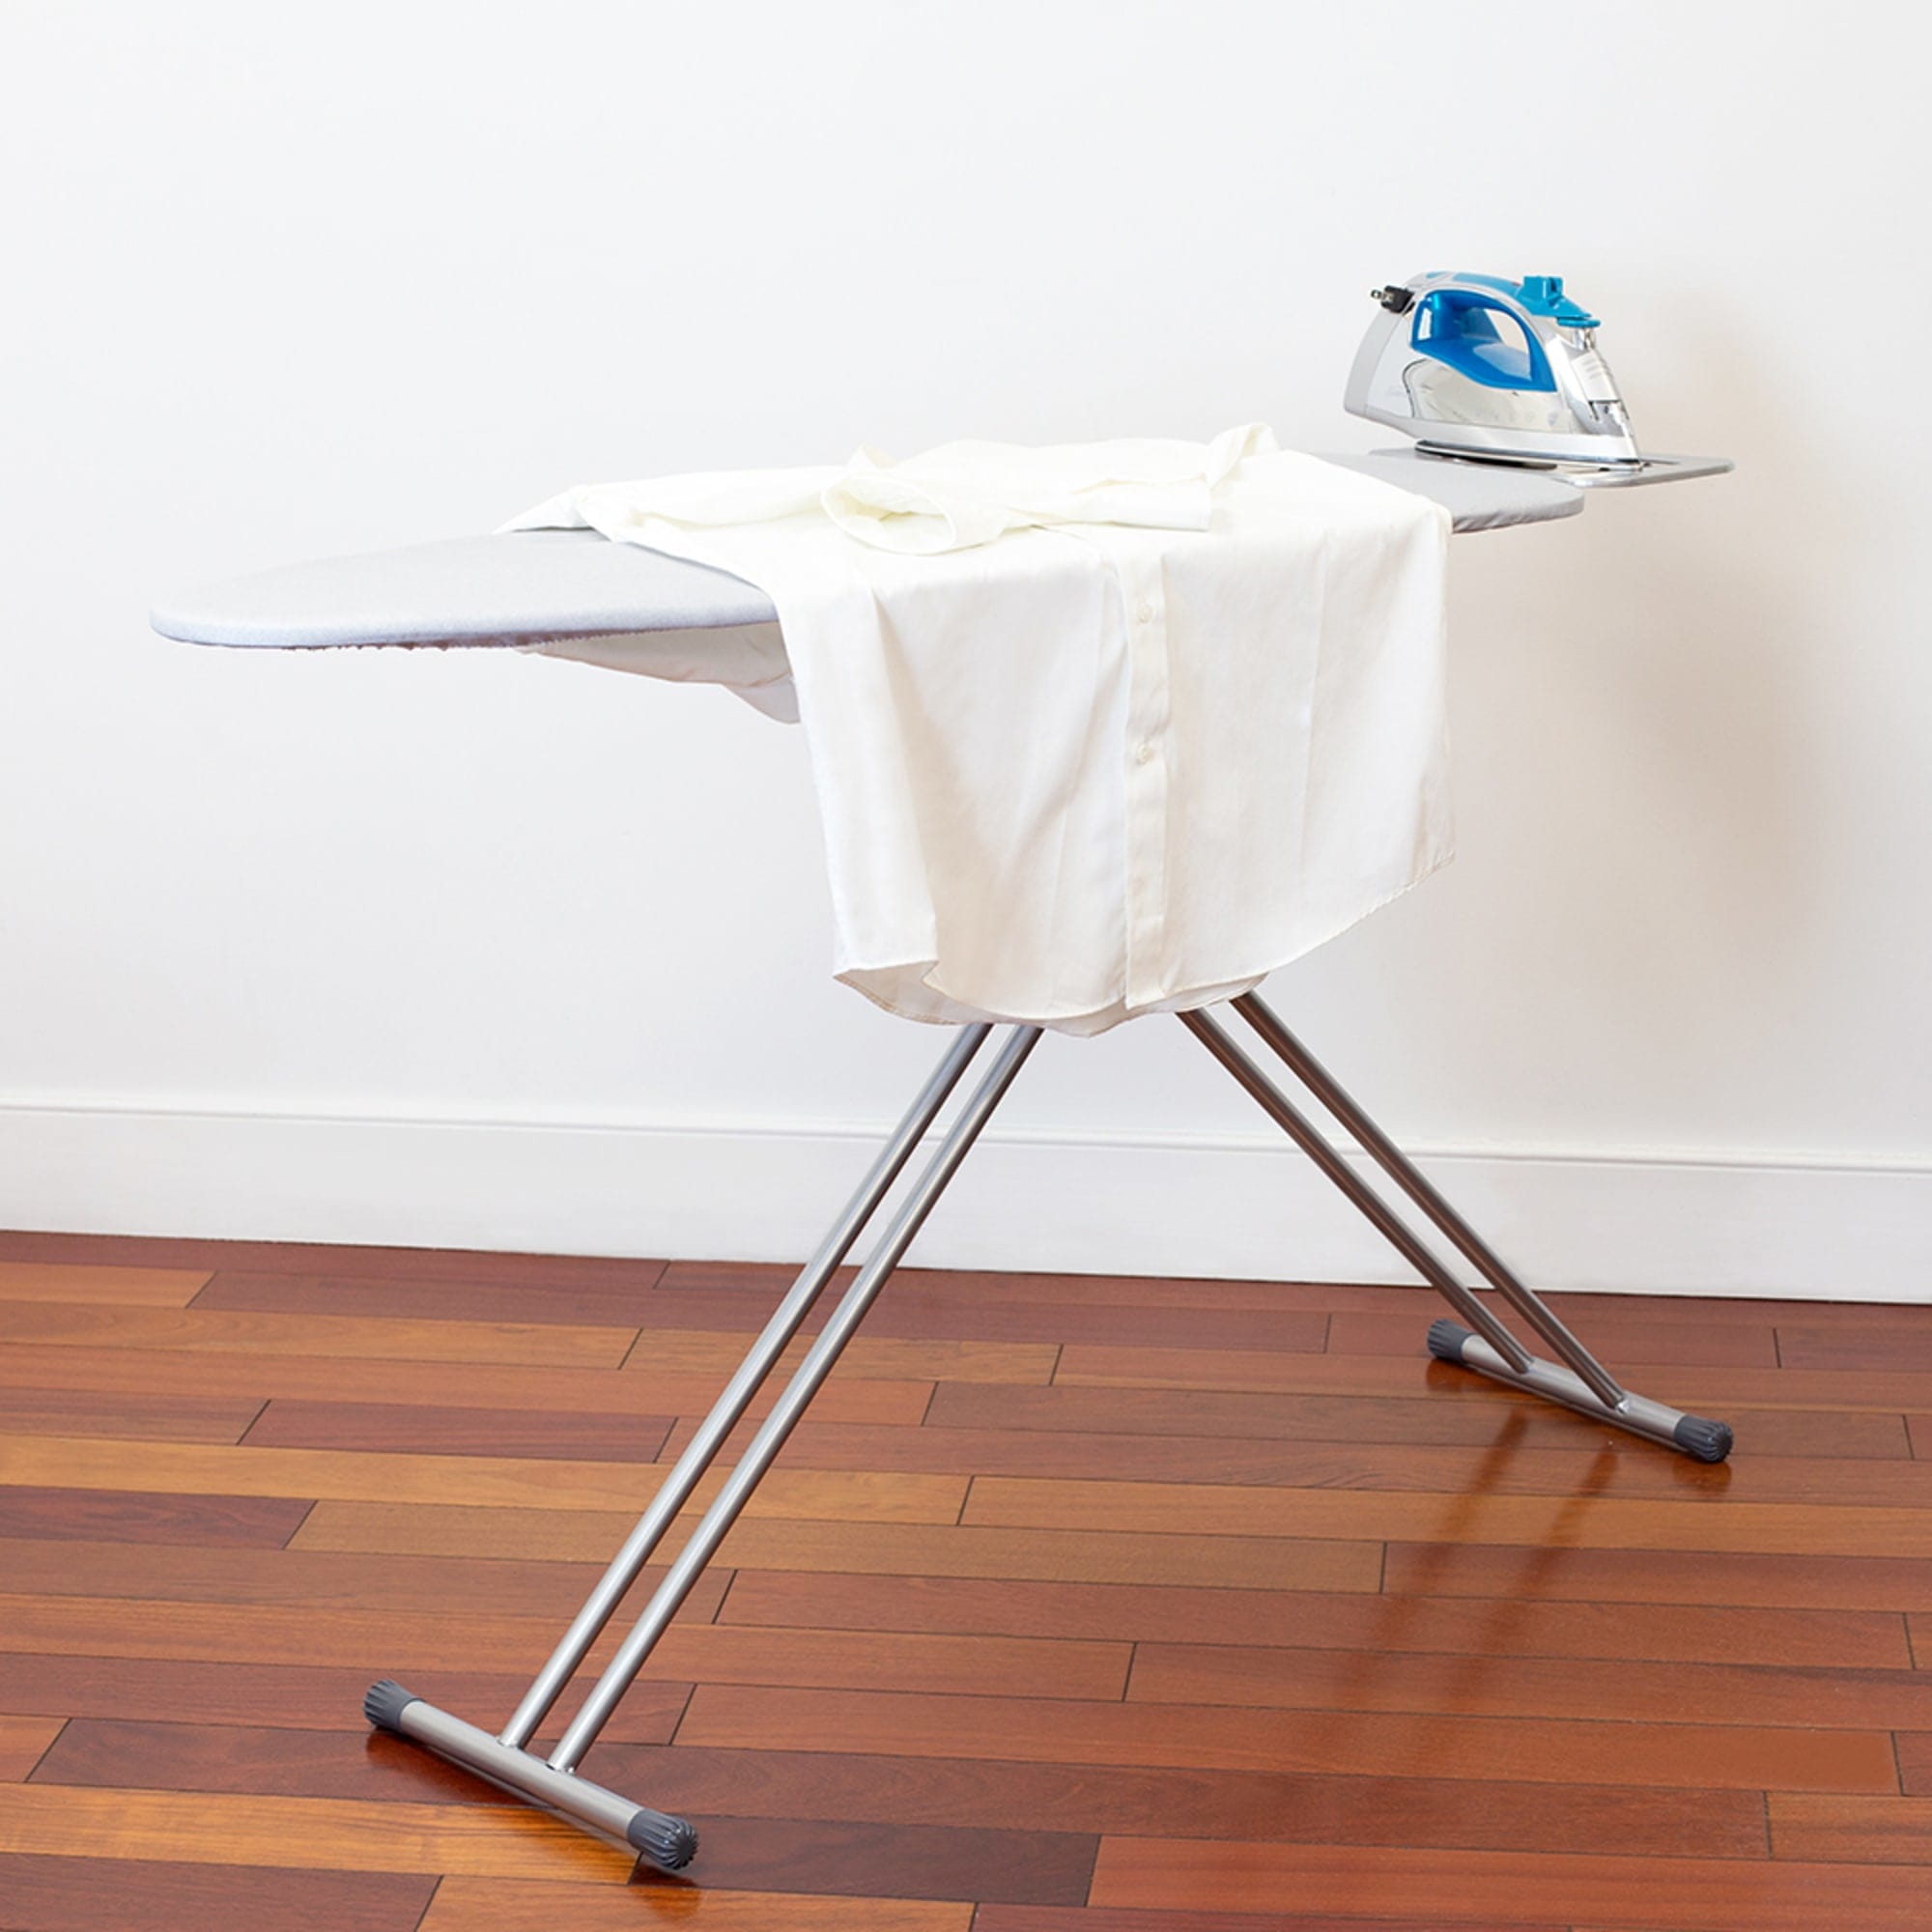 Home Basics  T-Leg Ironing Board with Iron Rest and Machine Washable Cotton Cover $25 EACH, CASE PACK OF 4